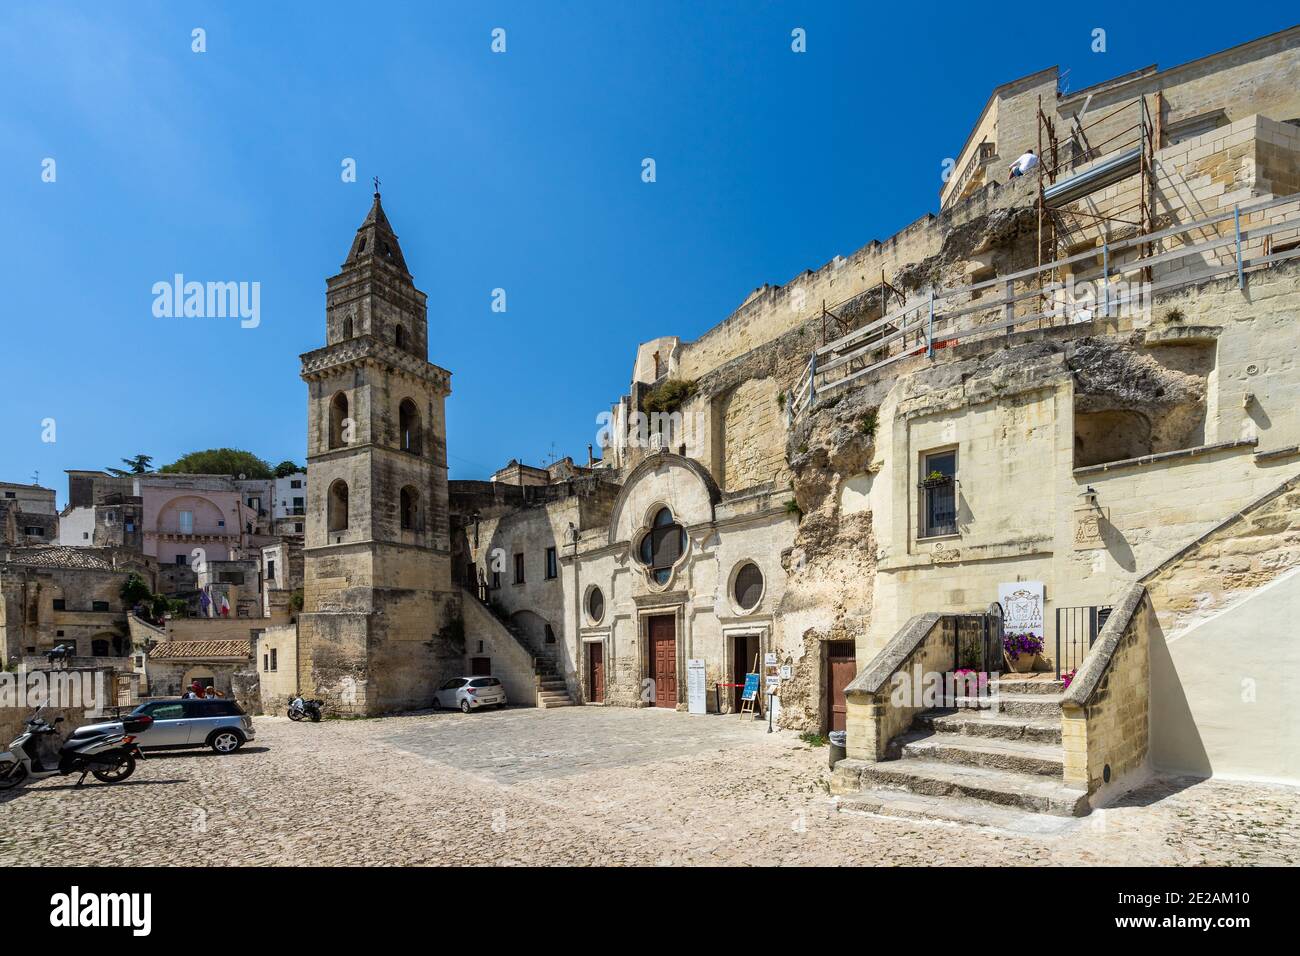 Entrance of San Pietro Barisano the largest of Matera's rupestrian churches, dating in its earliest parts to the 12th century, Basilicata, Italy Stock Photo